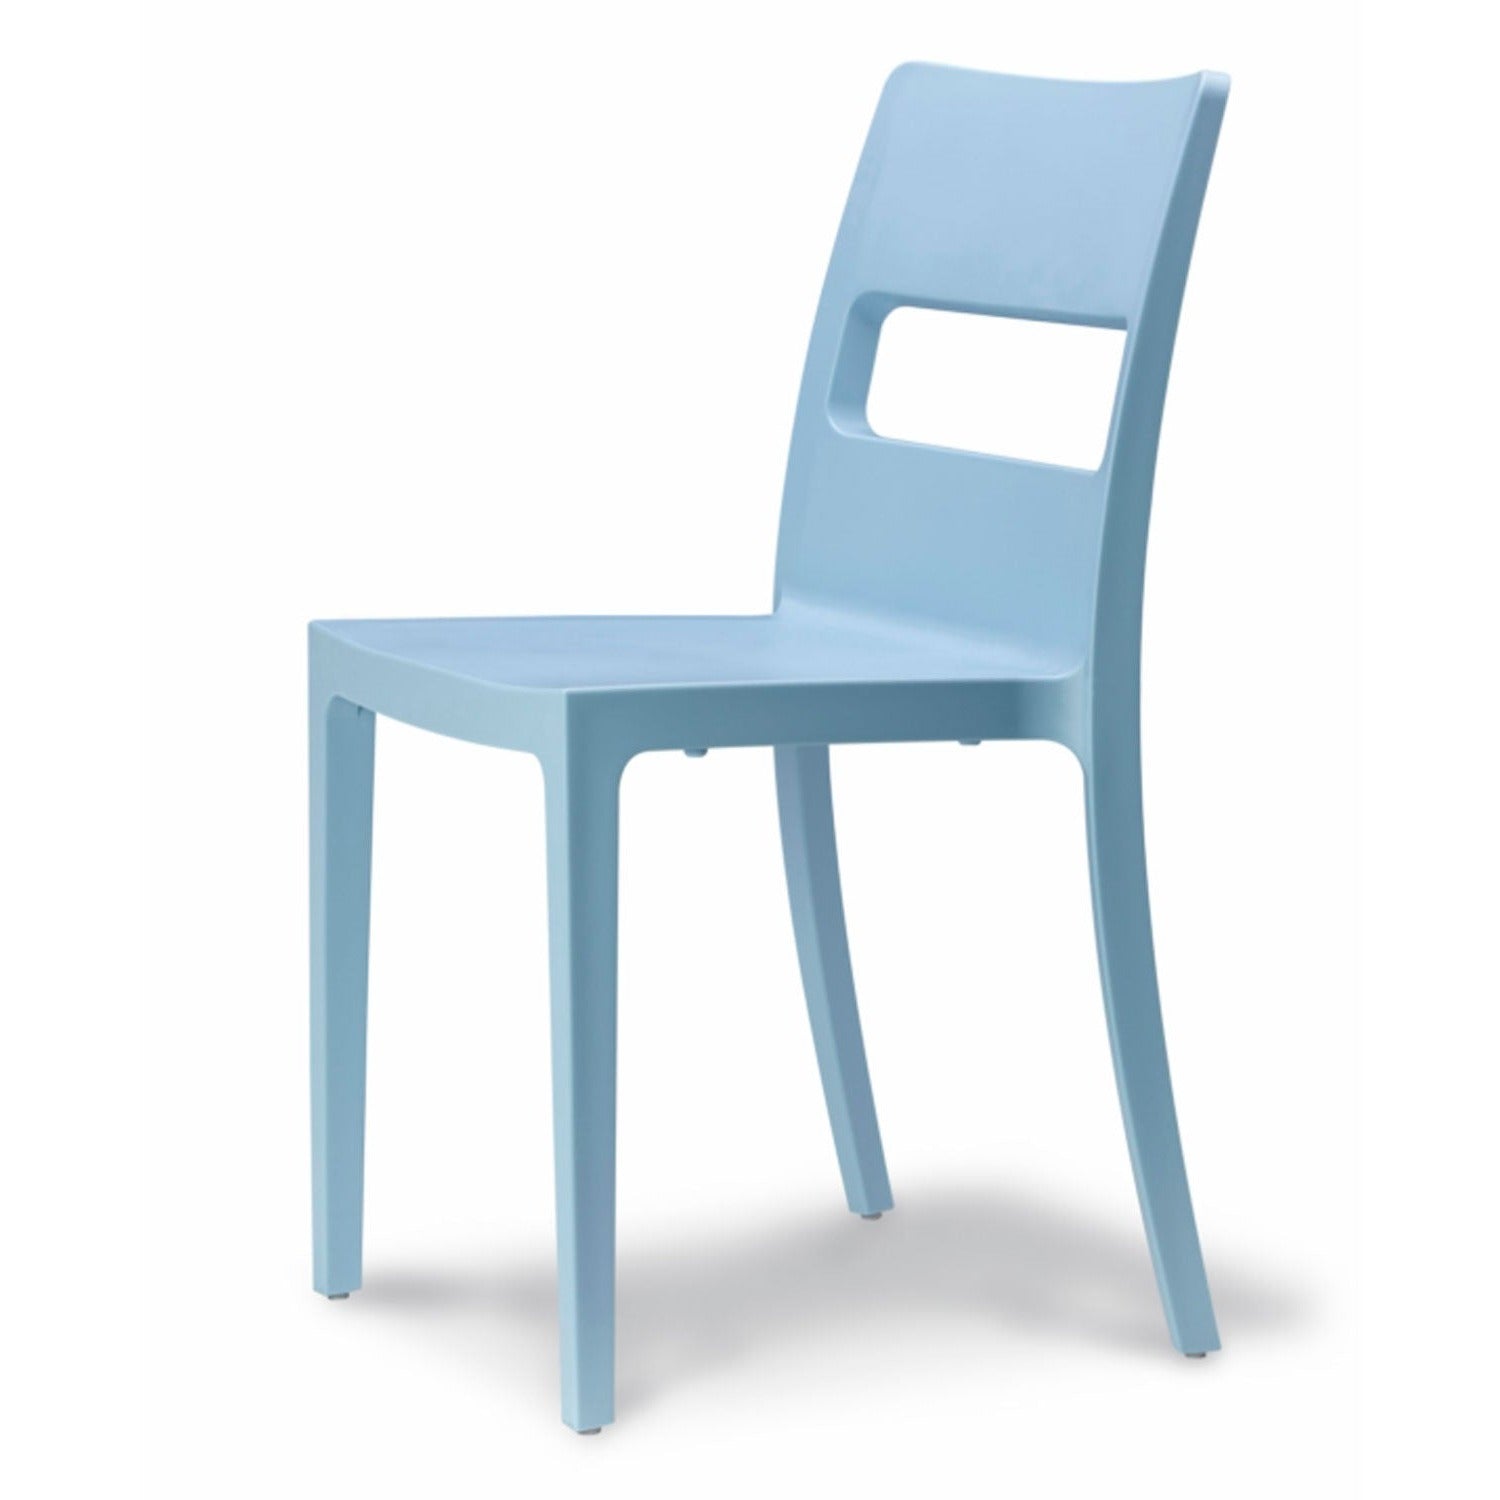 Sai Technopolymer Stacking Chair by Scab Design